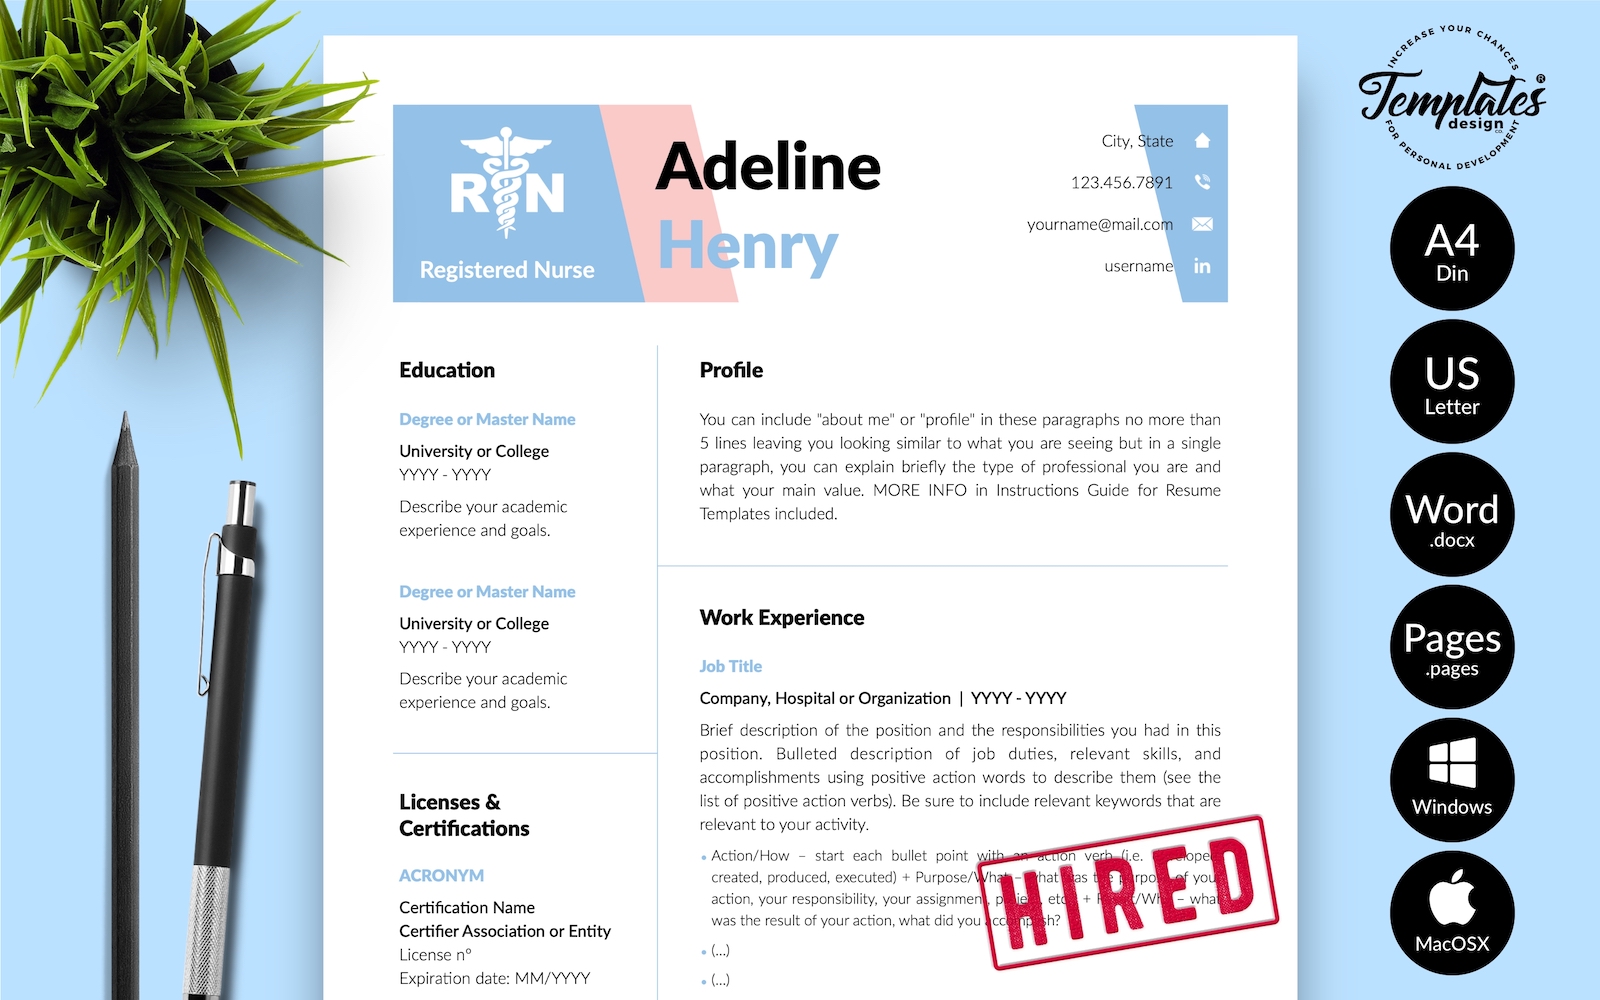 Adeline Henry - Nursing CV Resume Template with Cover Letter for Microsoft Word & iWork Pages